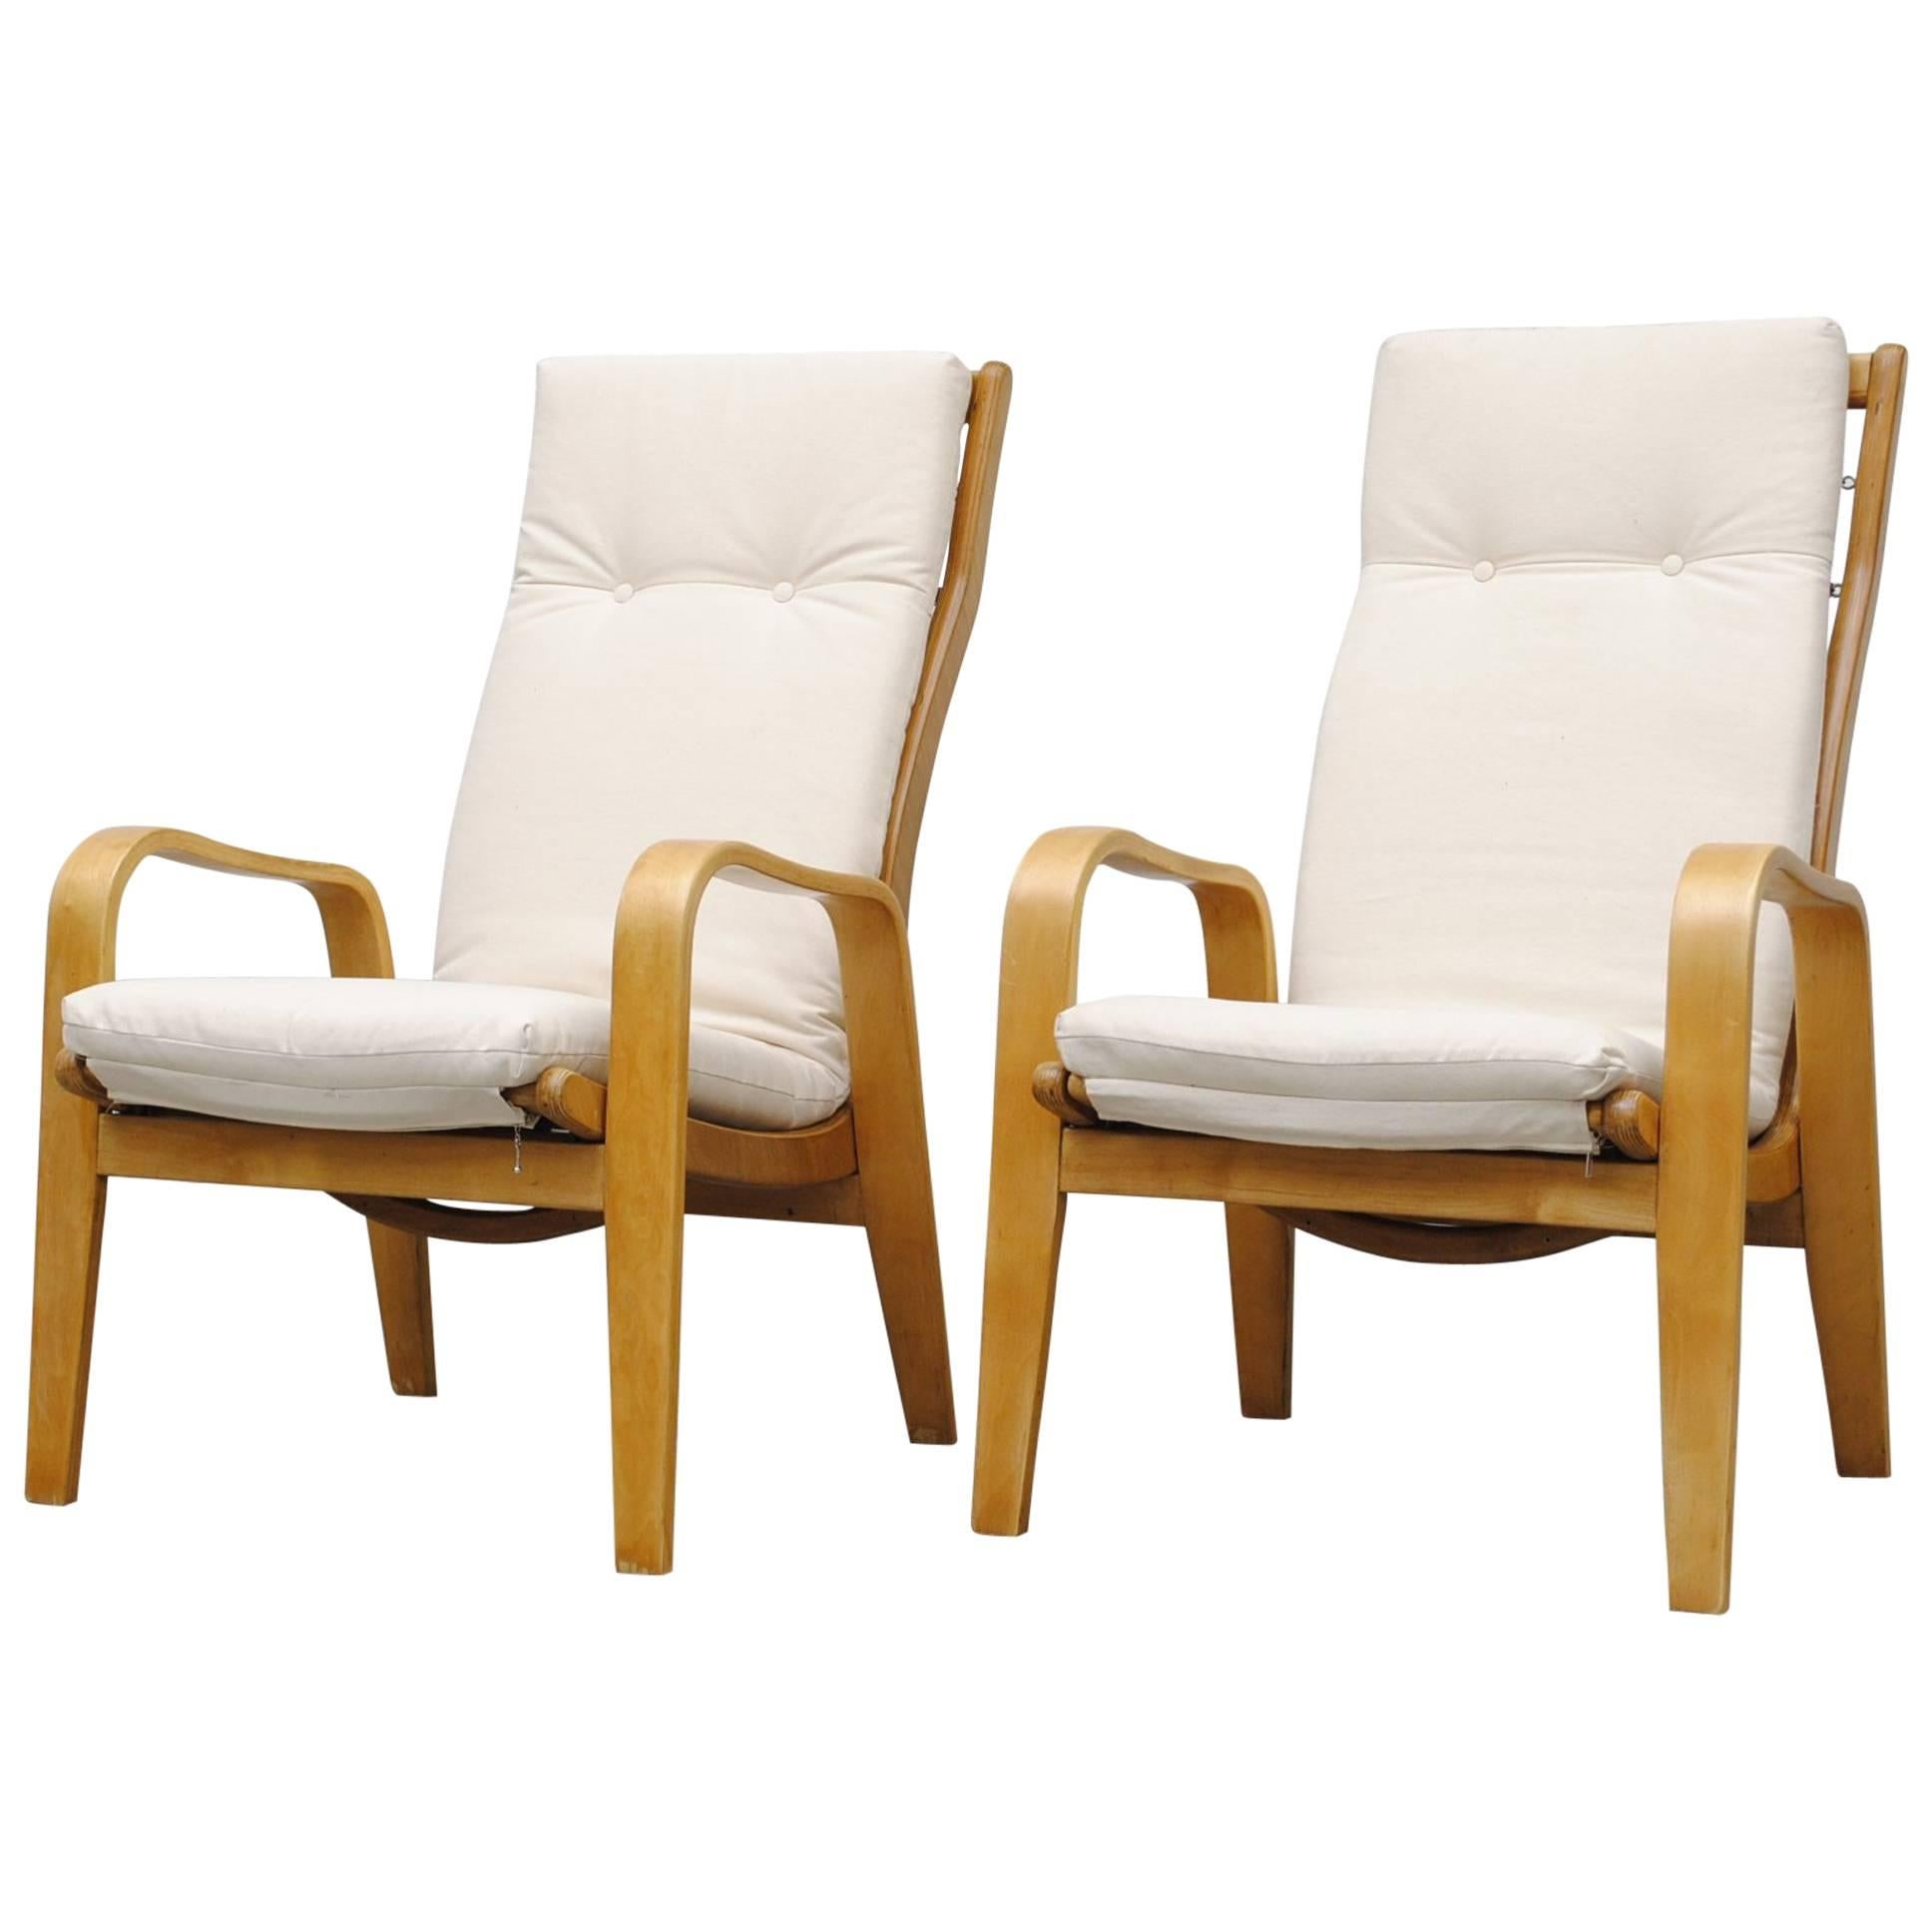 Pair of Alvar Aalto Style Bent Plywood Lounge Chairs by Pastoe